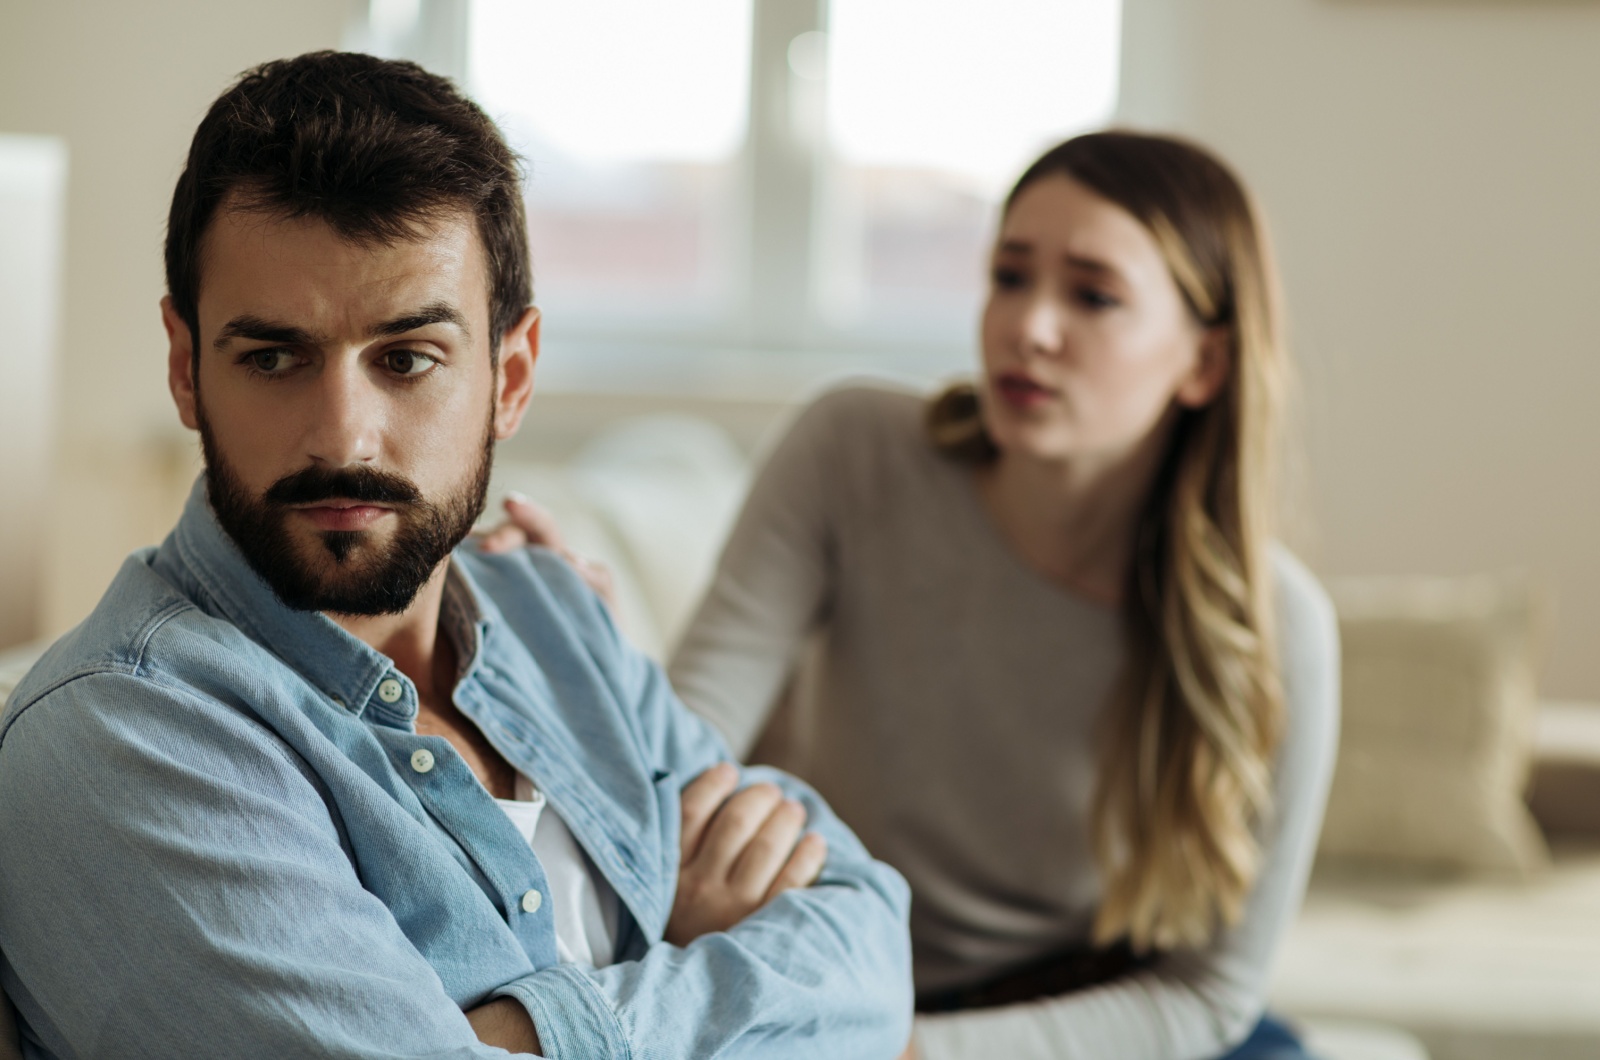 man not paying attention to woman